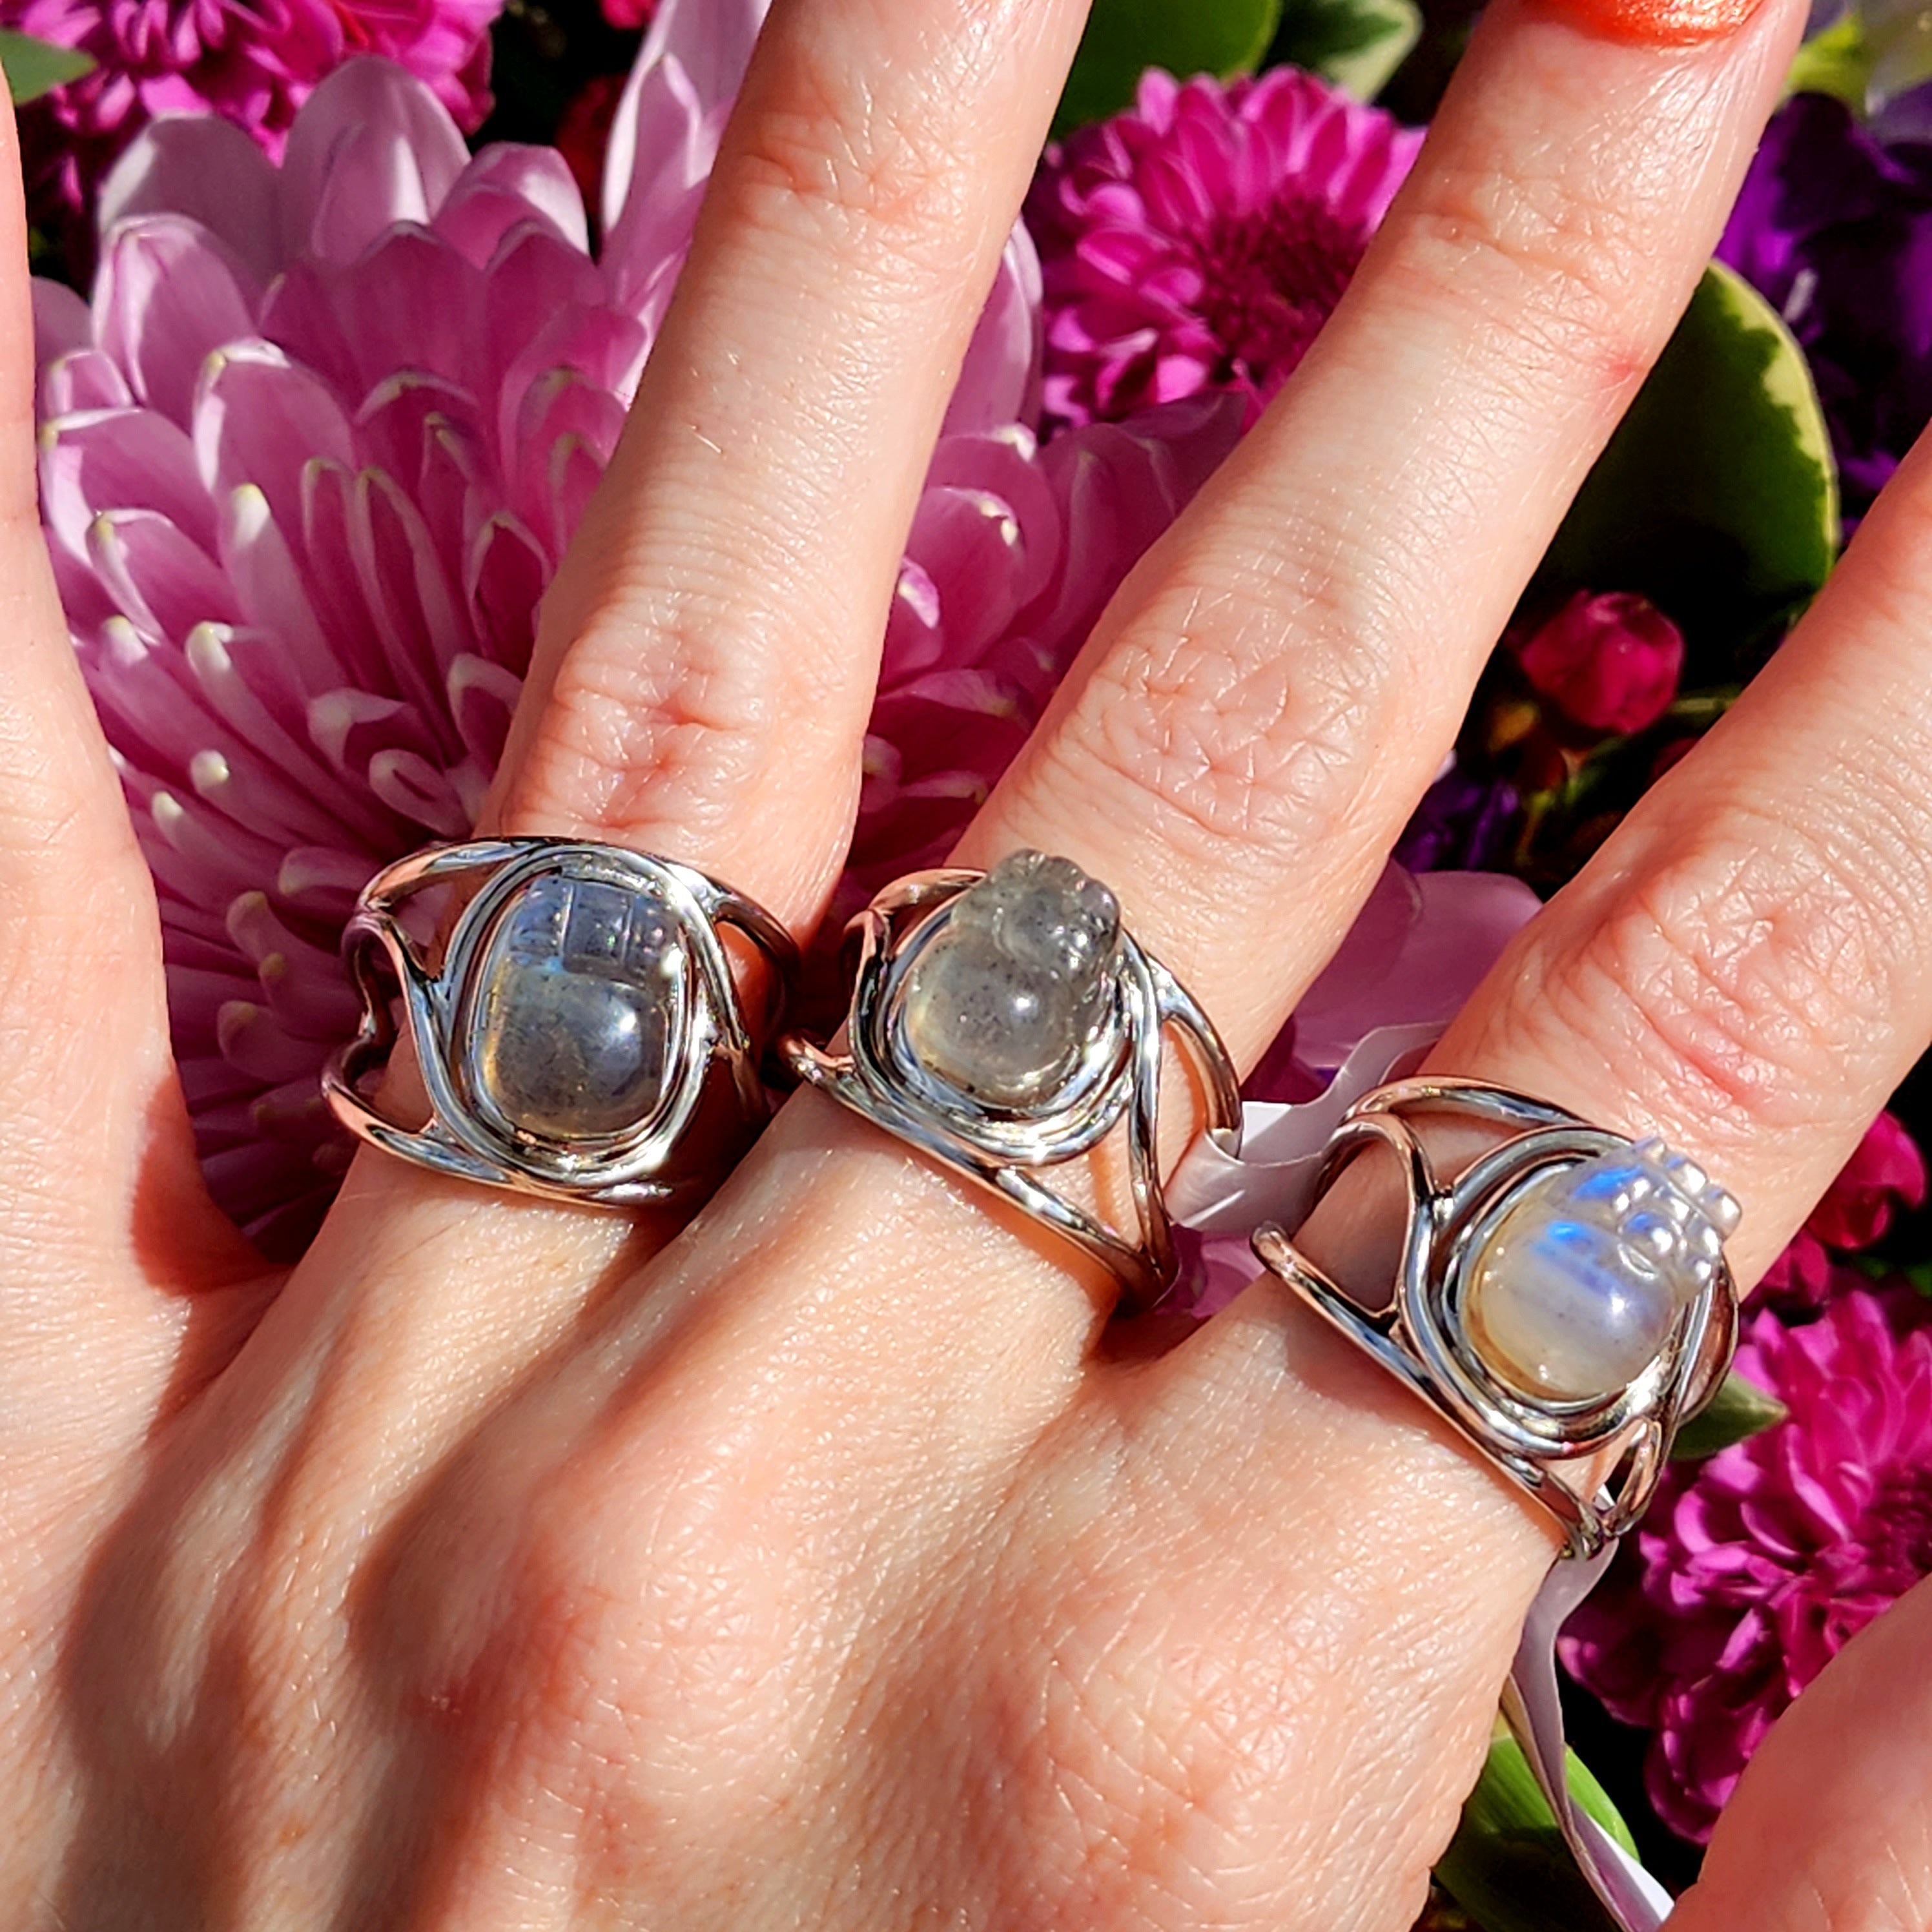 Labradorite Pixiu Finger Cuff Adjustable Ring .925 Silver for Protection and Guidance